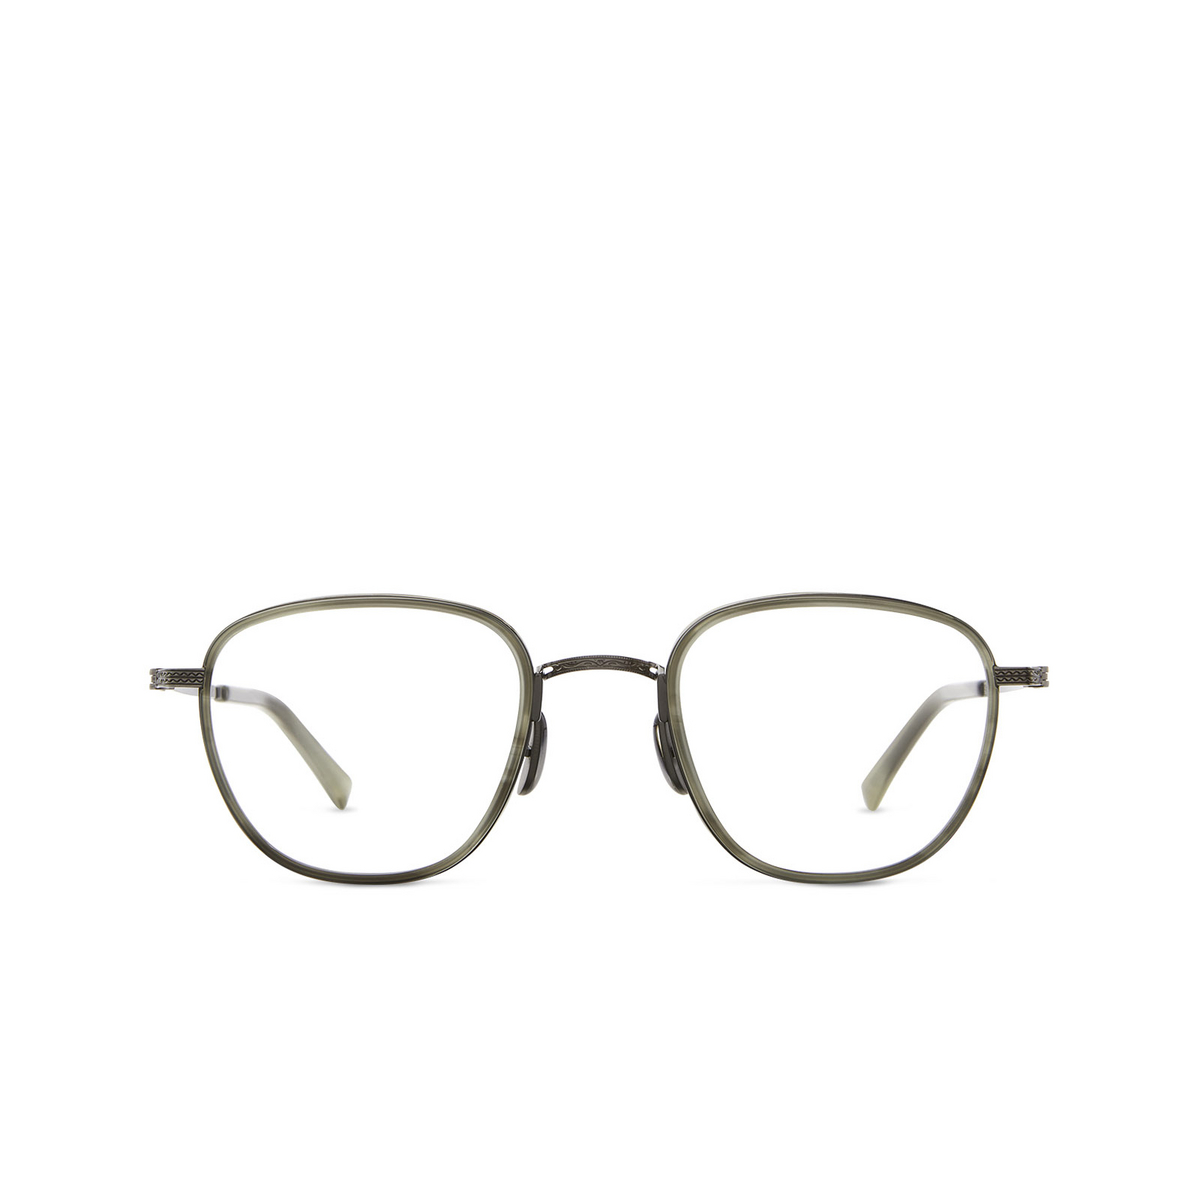 Mr. Leight GRIFFITH II C Eyeglasses SYC-PW Sycamore-Pewter - front view